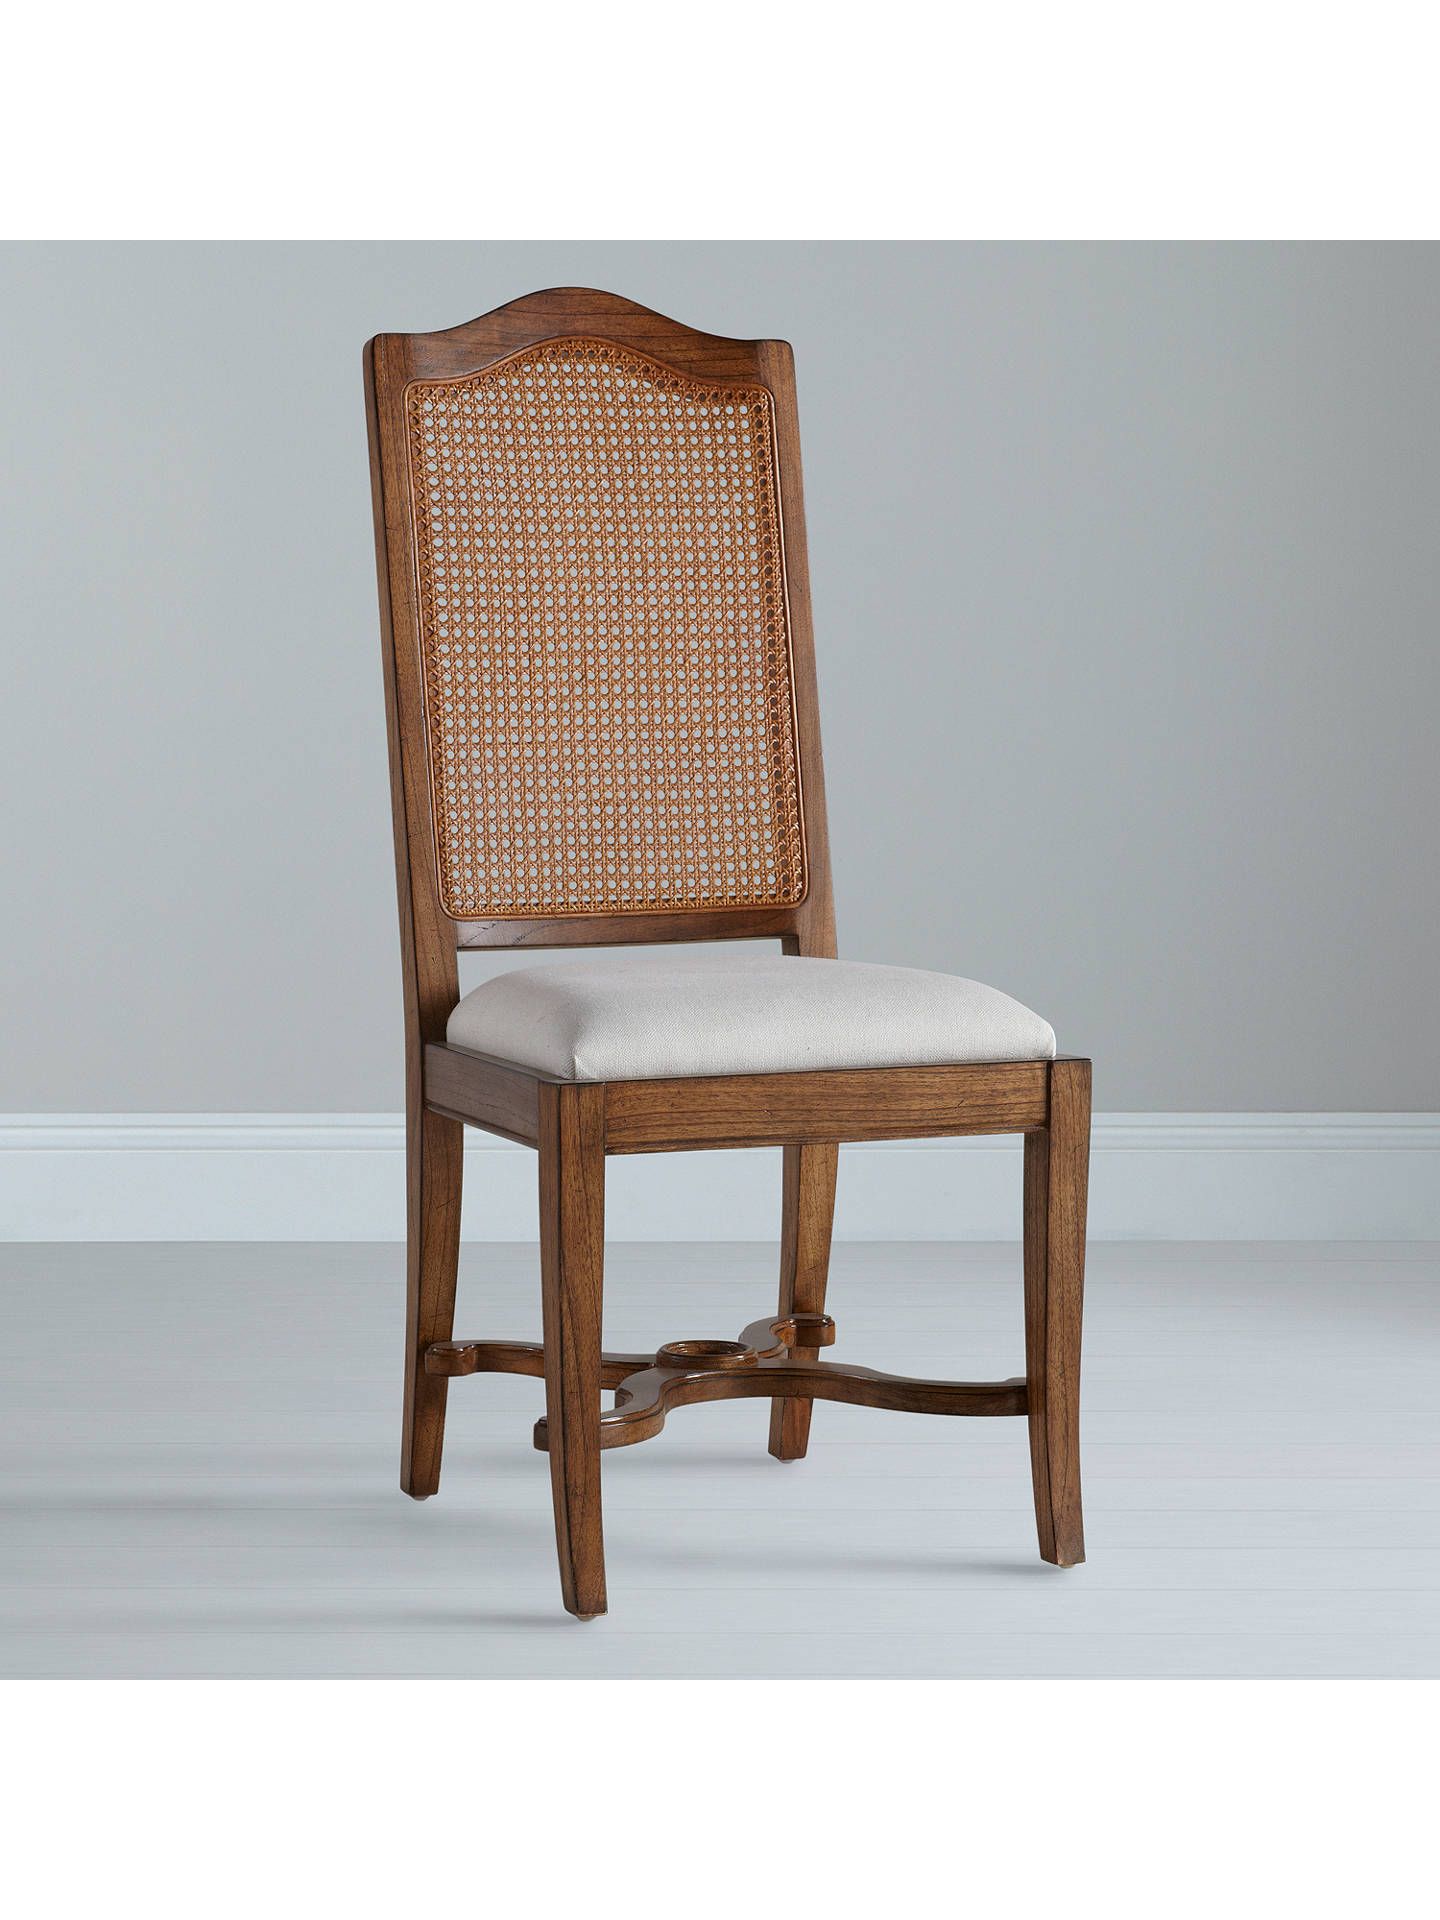 John Lewis Hemingway Cane Back Side Chair This dining chair is made from melia ash and pippy oak